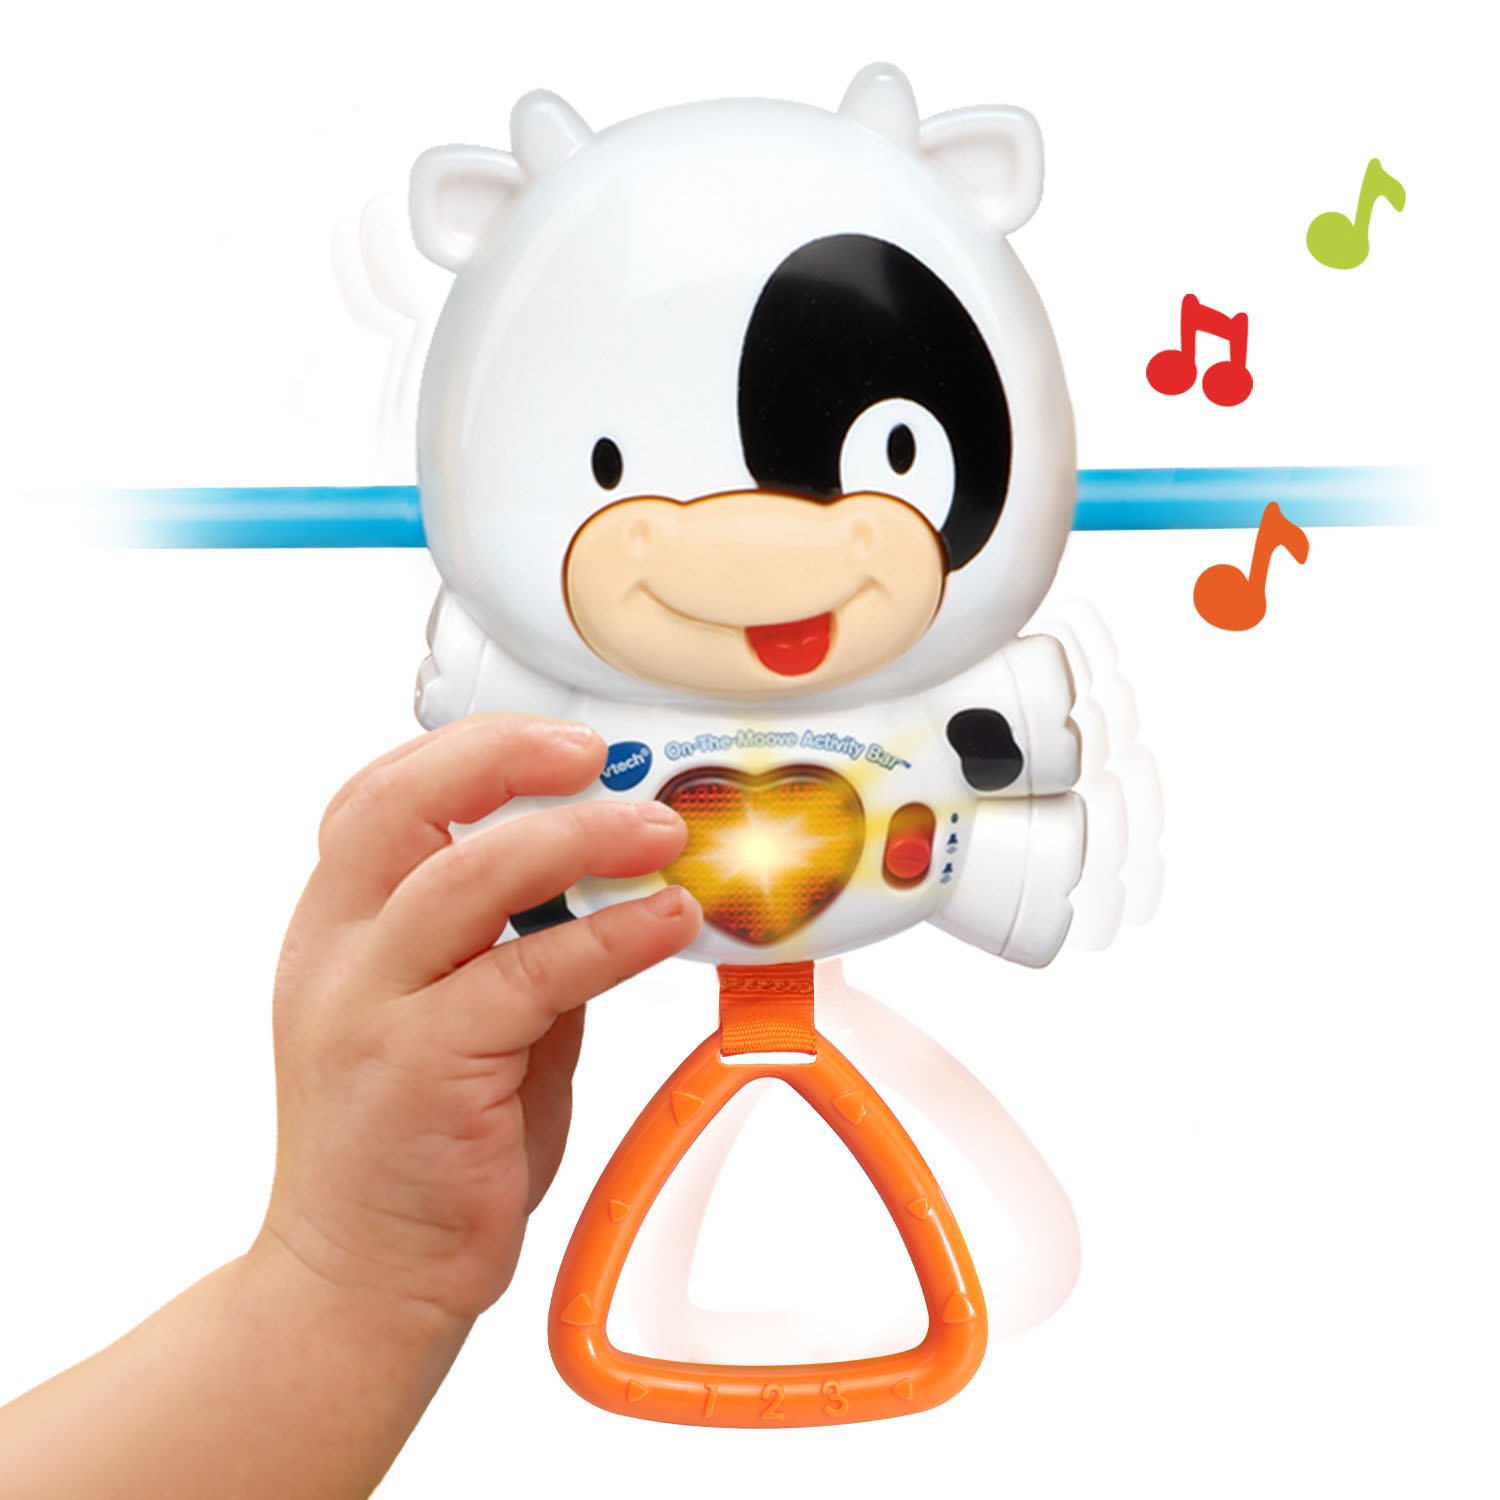 VTech Baby On-The-Moove Activity Bar